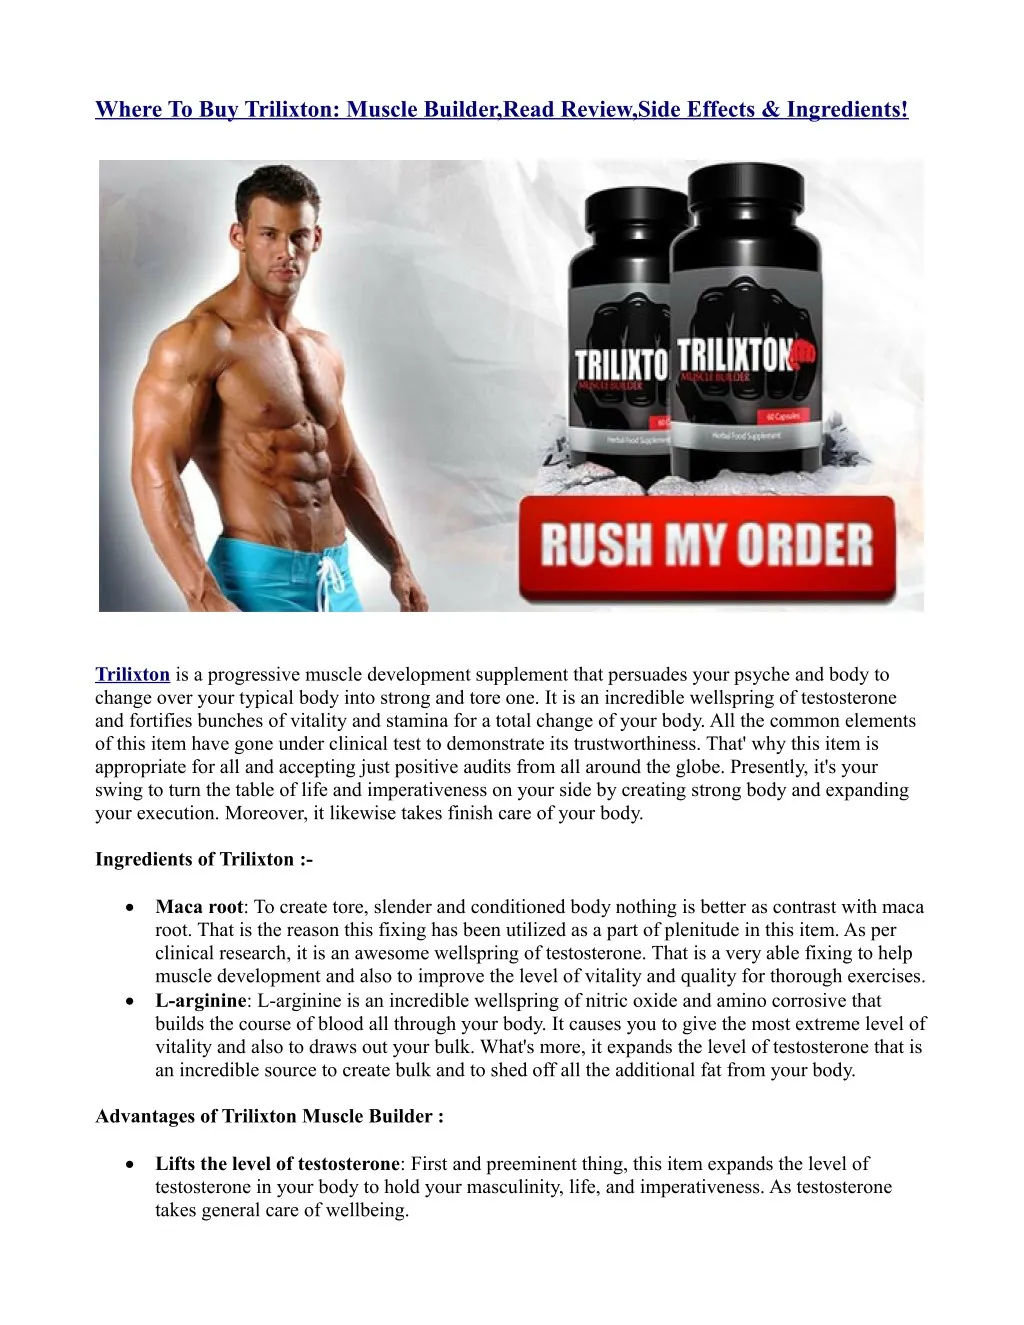 where to buy trilixton muscle builder read review